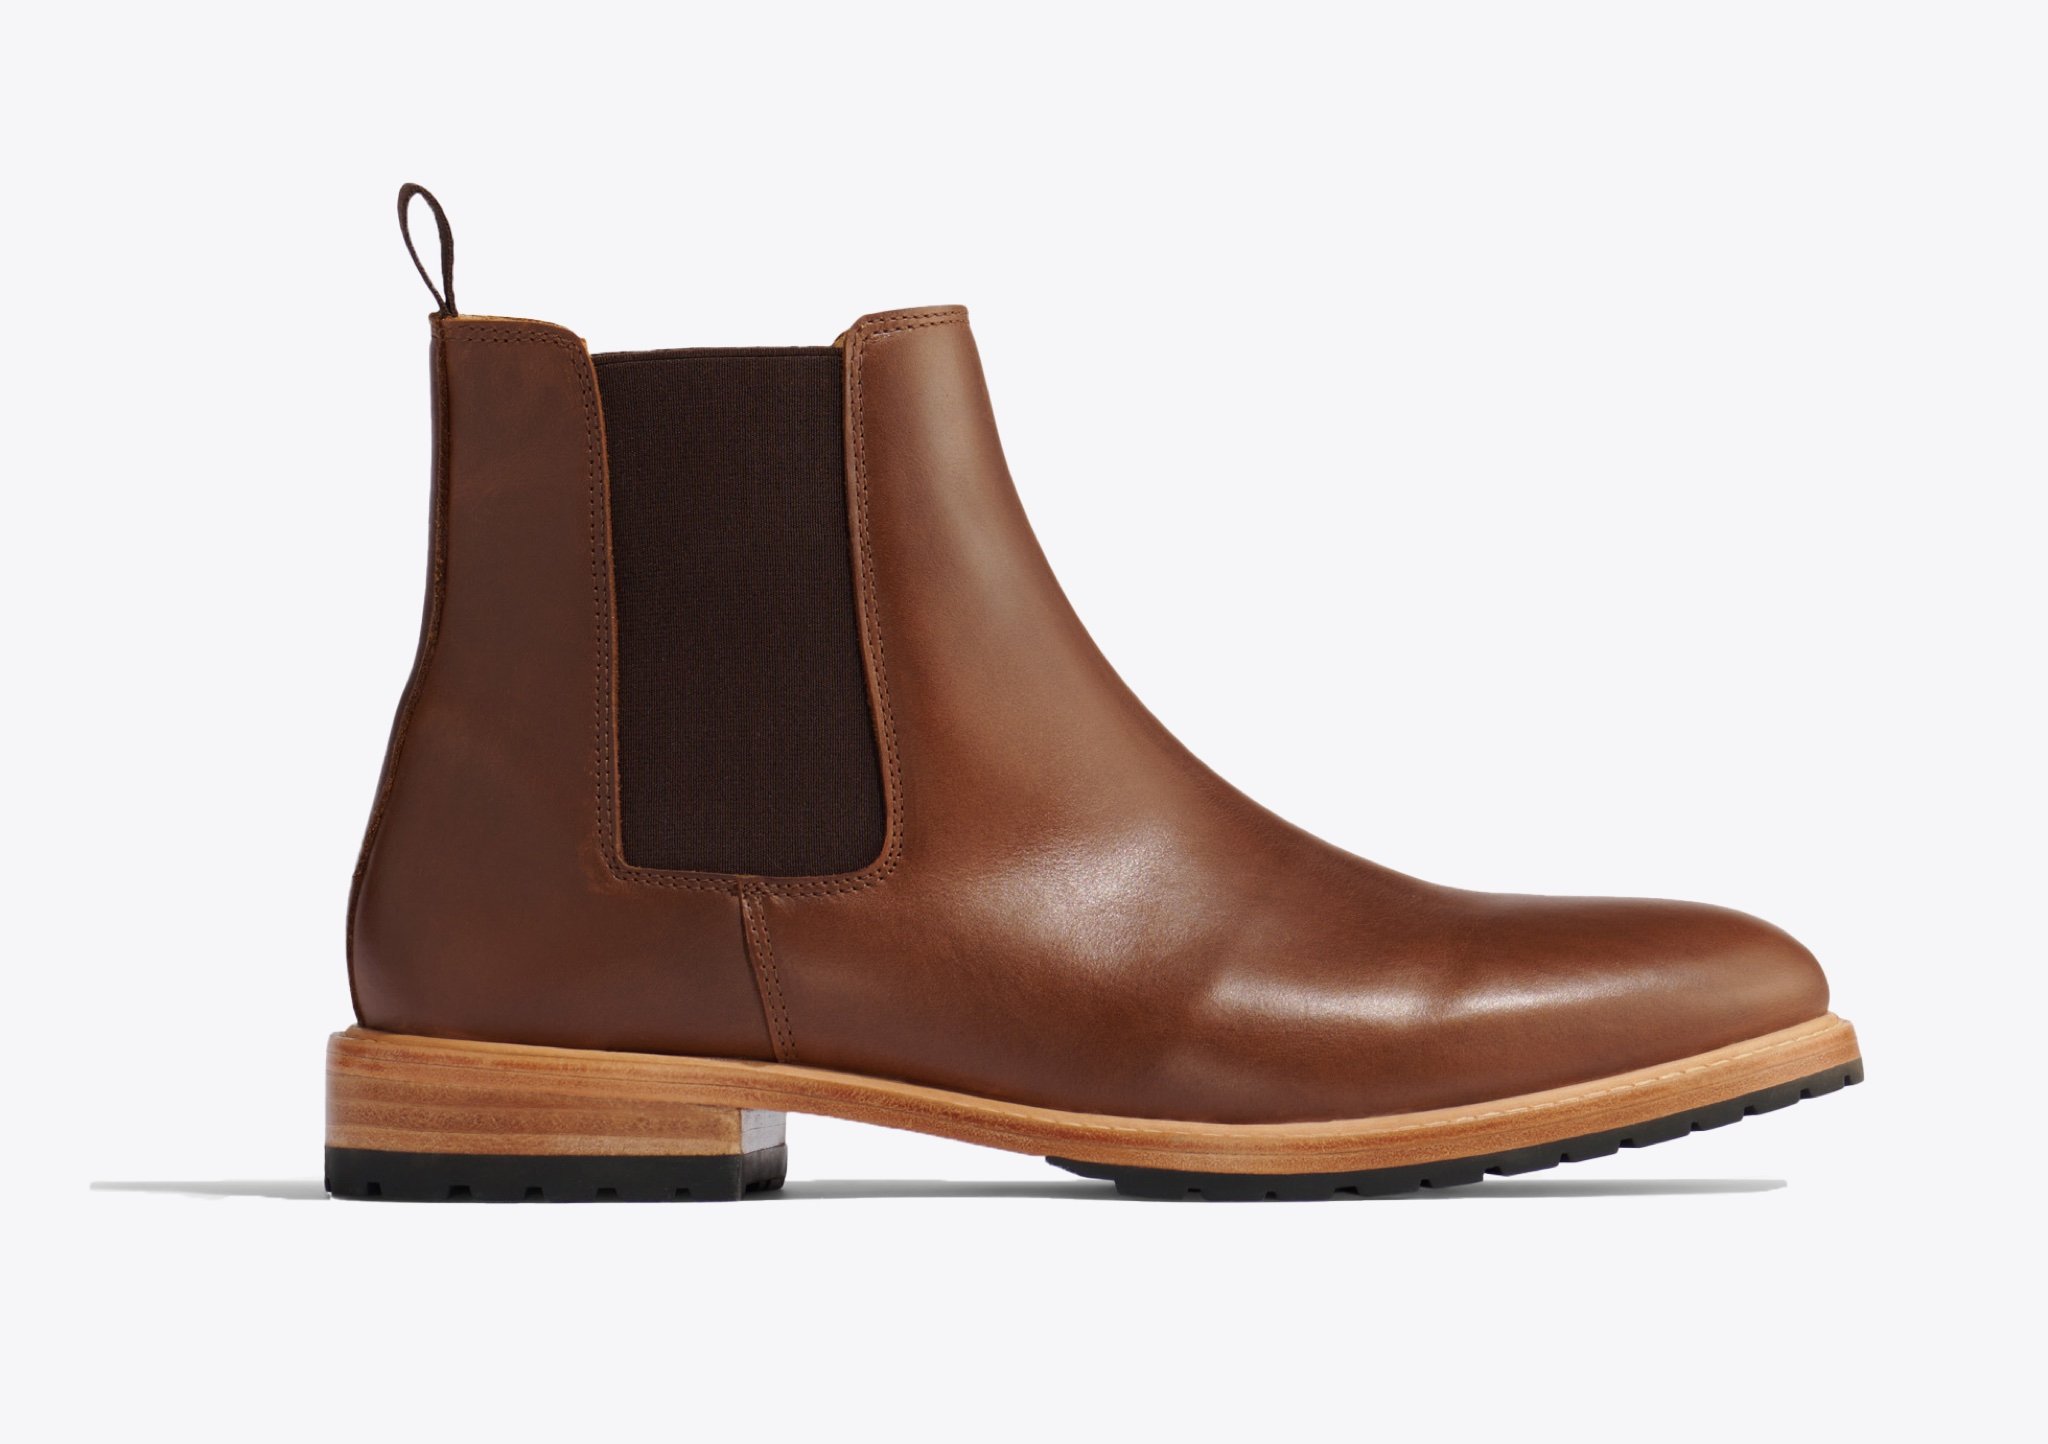 Nisolo Marco Everyday Chelsea Boot Brown - Every Nisolo product is built on the foundation of comfort, function, and design. 